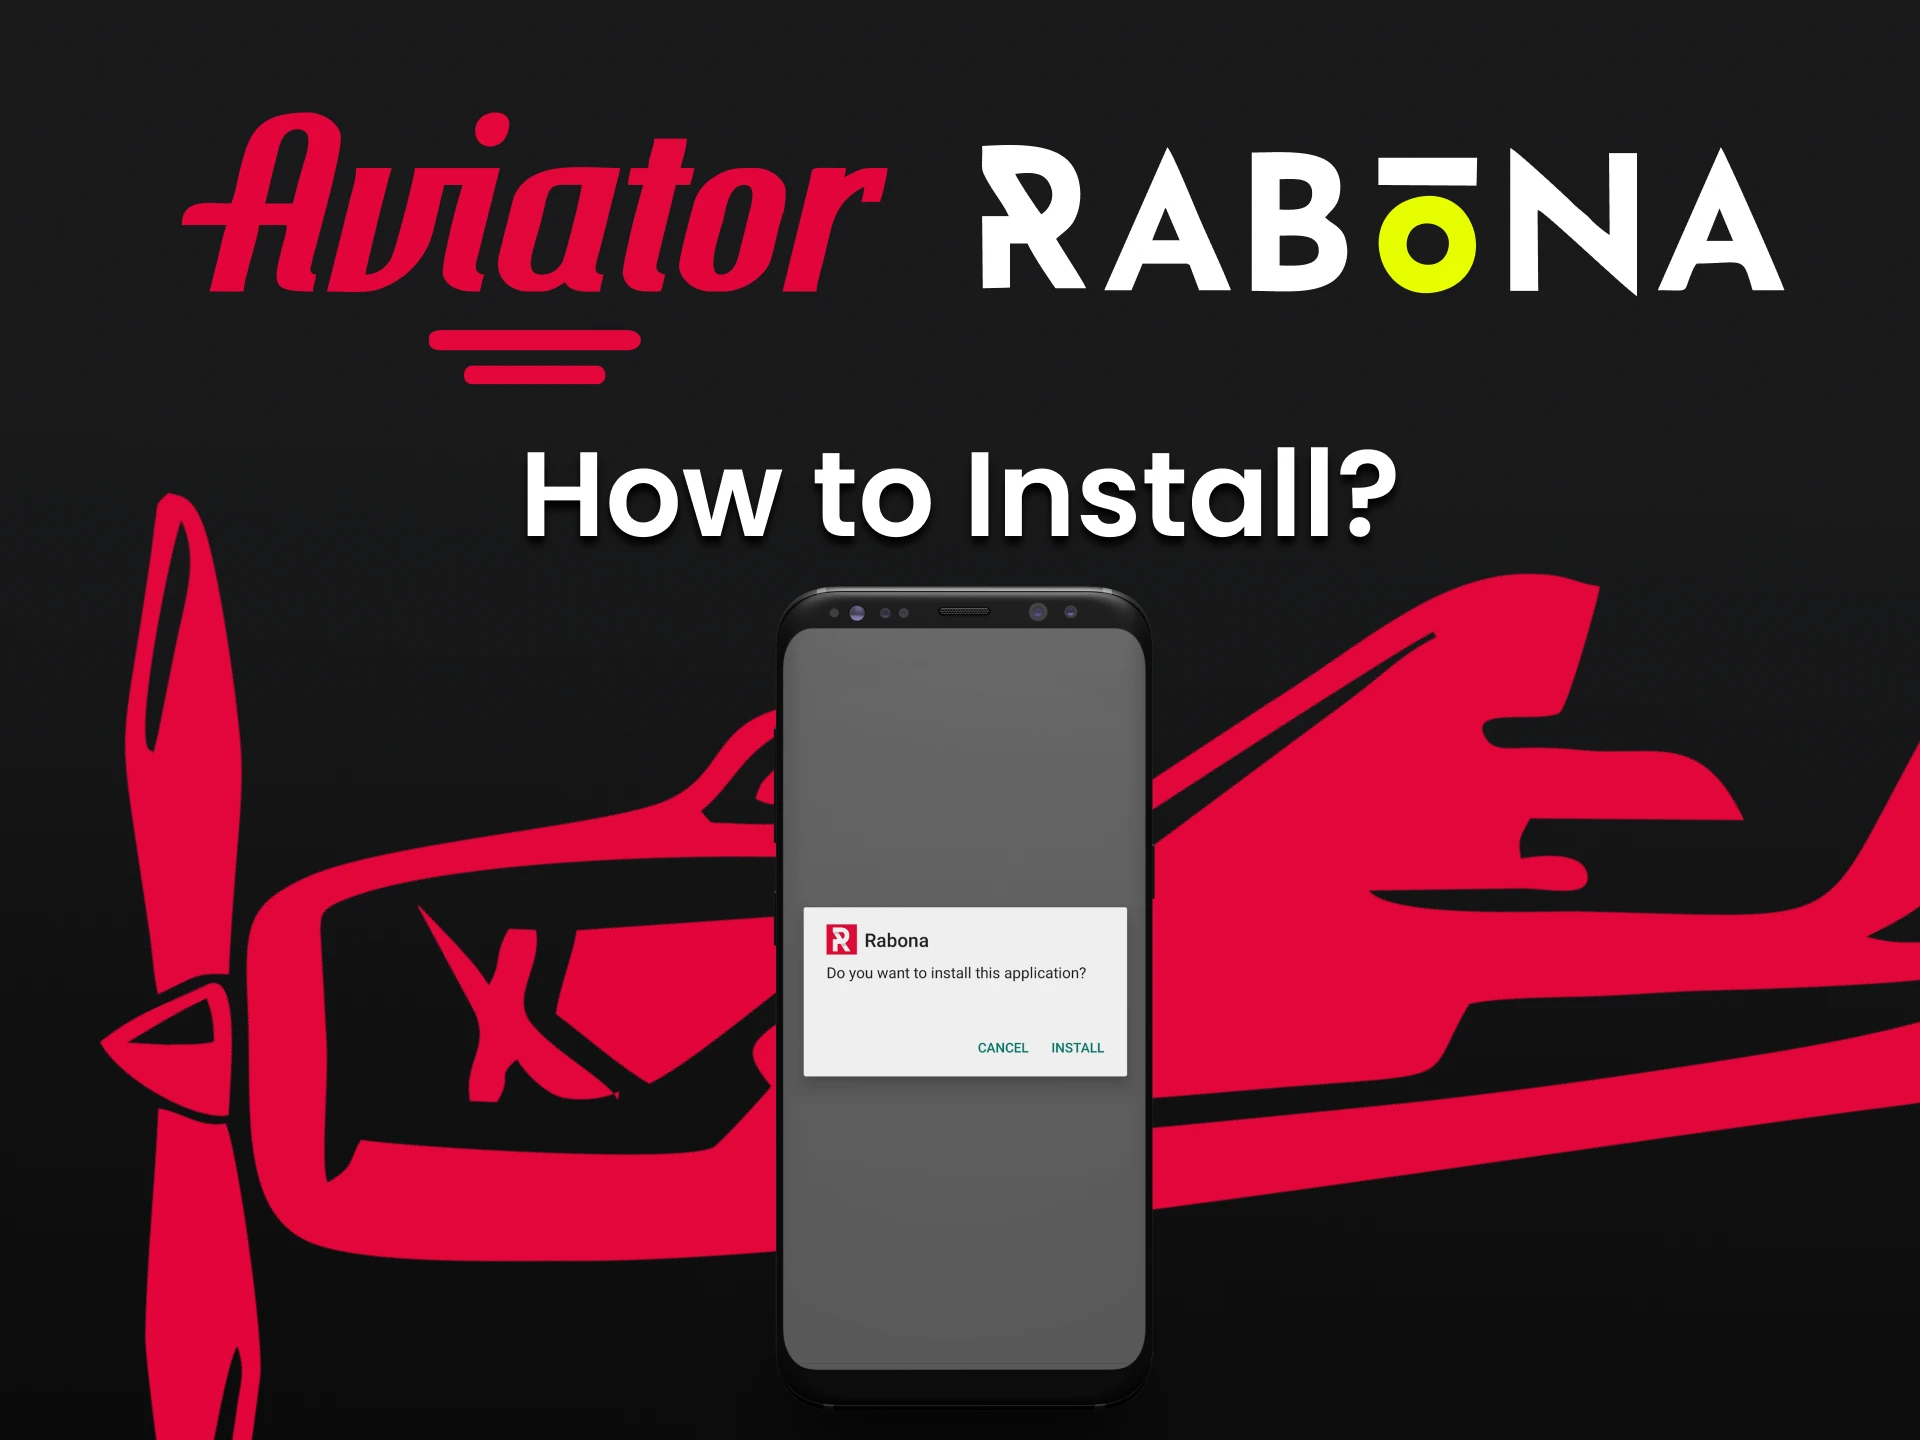 Perform the installation of the Rabona application for playing Aviator.